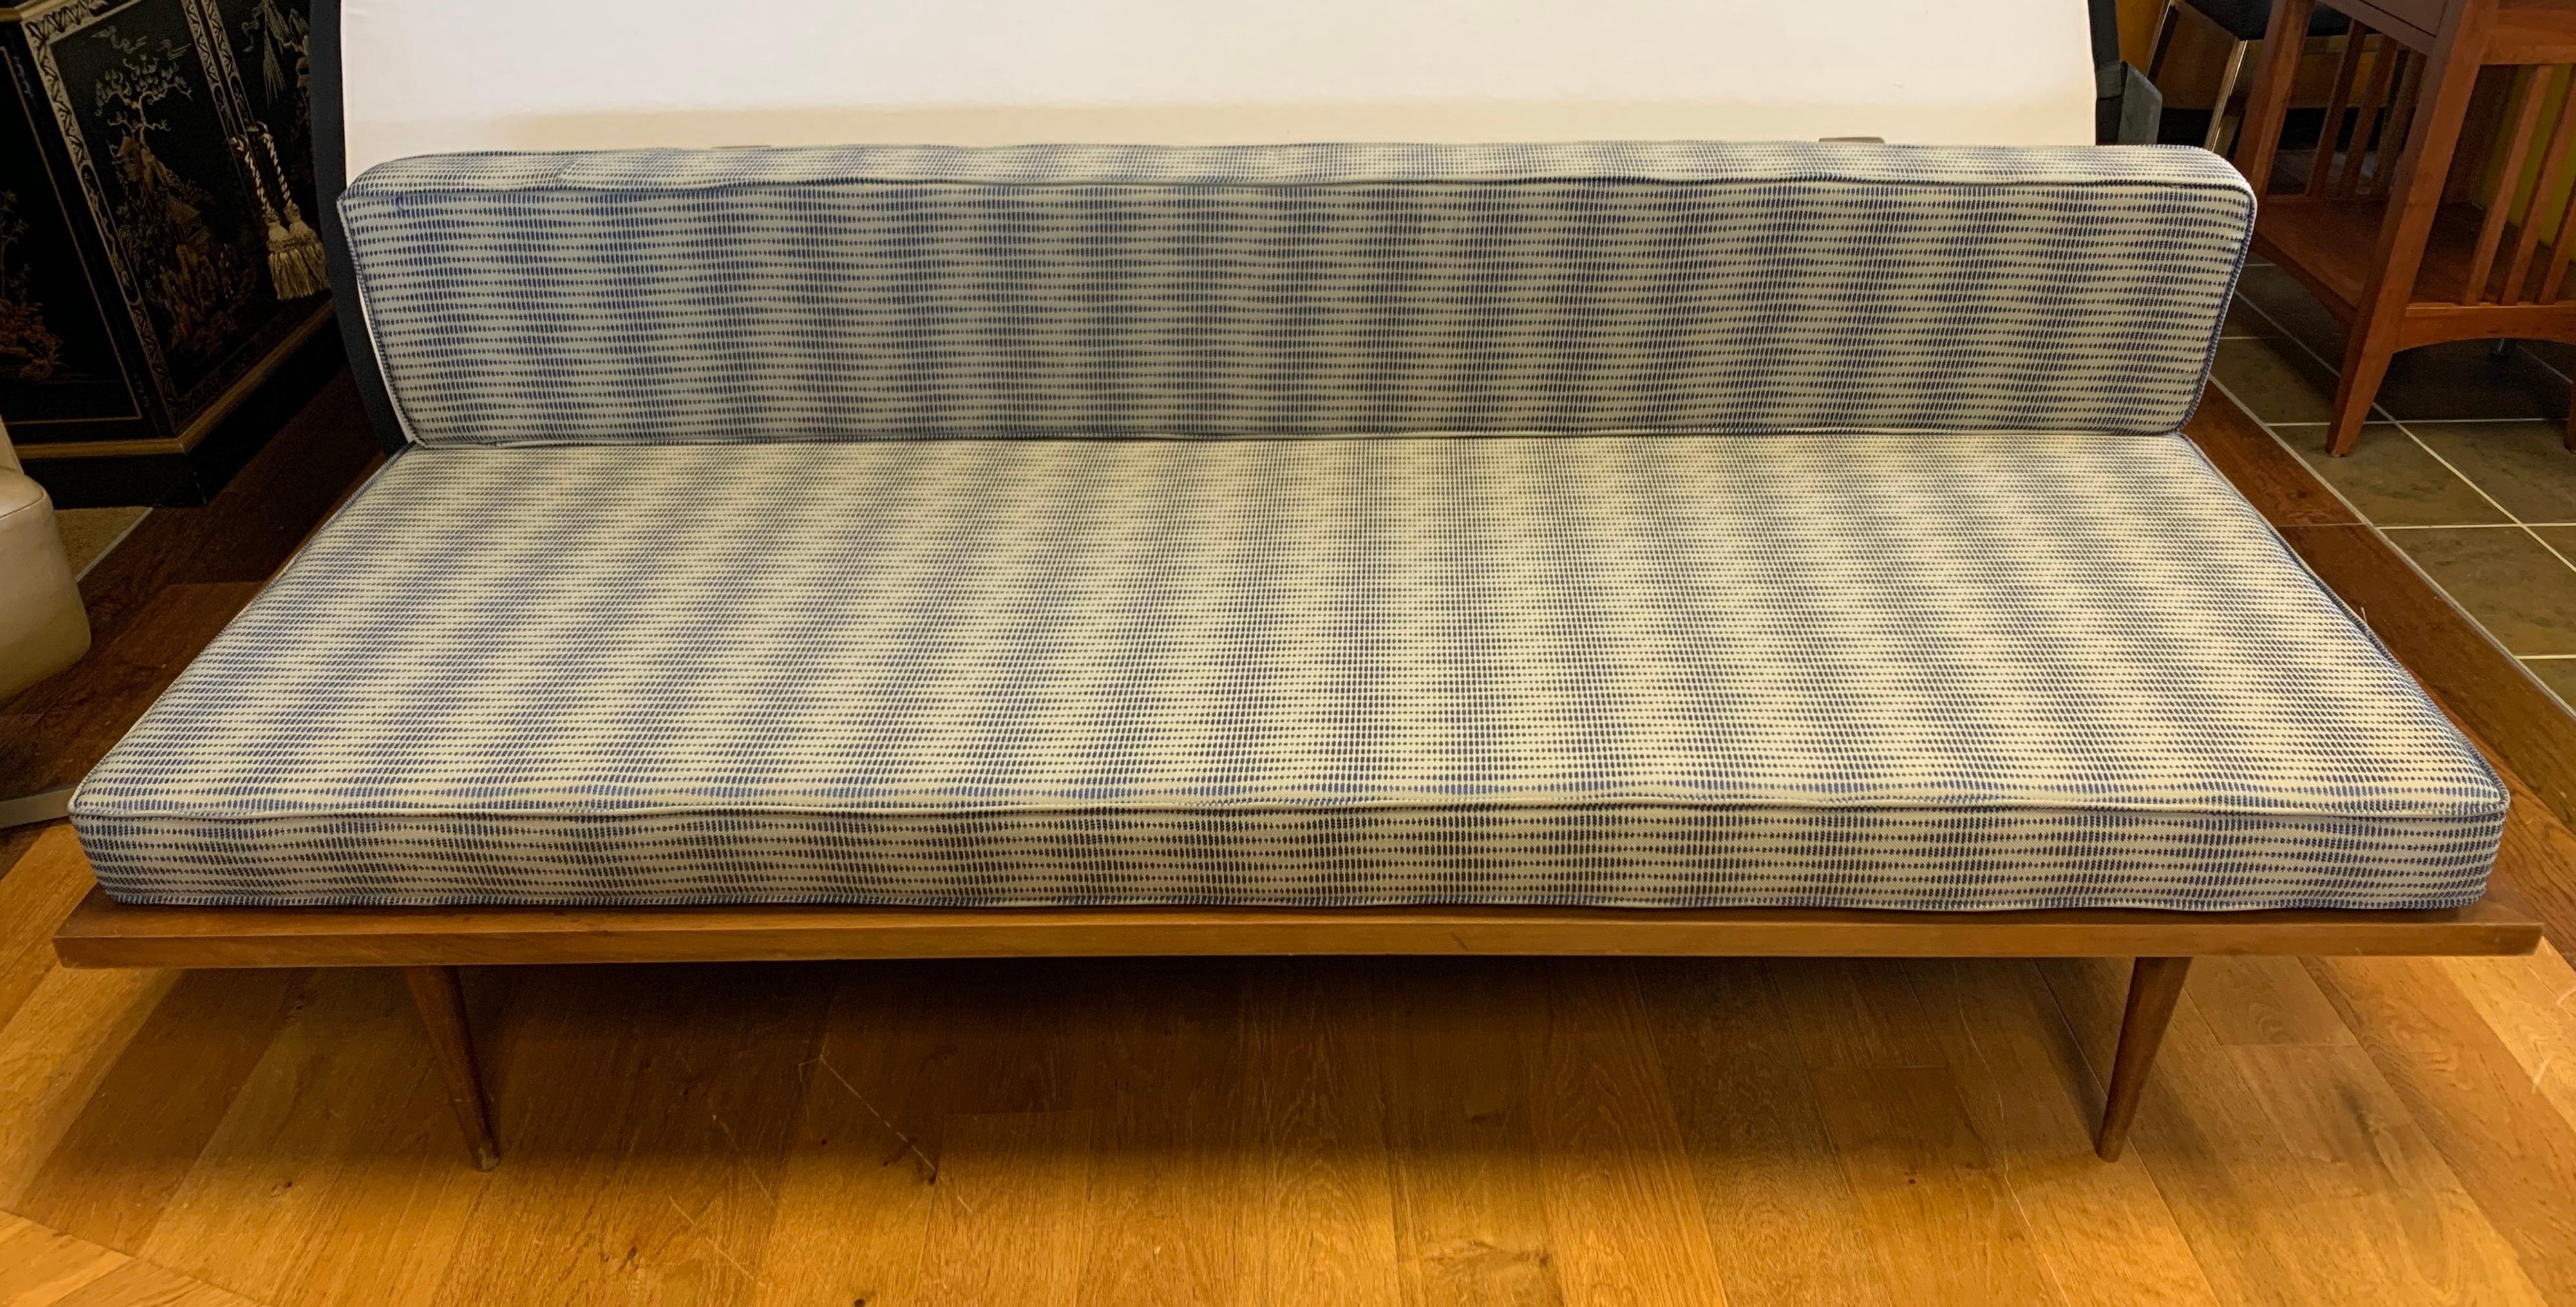 Magnificent newly upholstered in a vintage Herman Miller fabric, Danish modern style vintage settee
sofa that measures exactly six feet long. All original except for the fabric and
new fill. Fabric is blue and light gray with a geometric pattern.